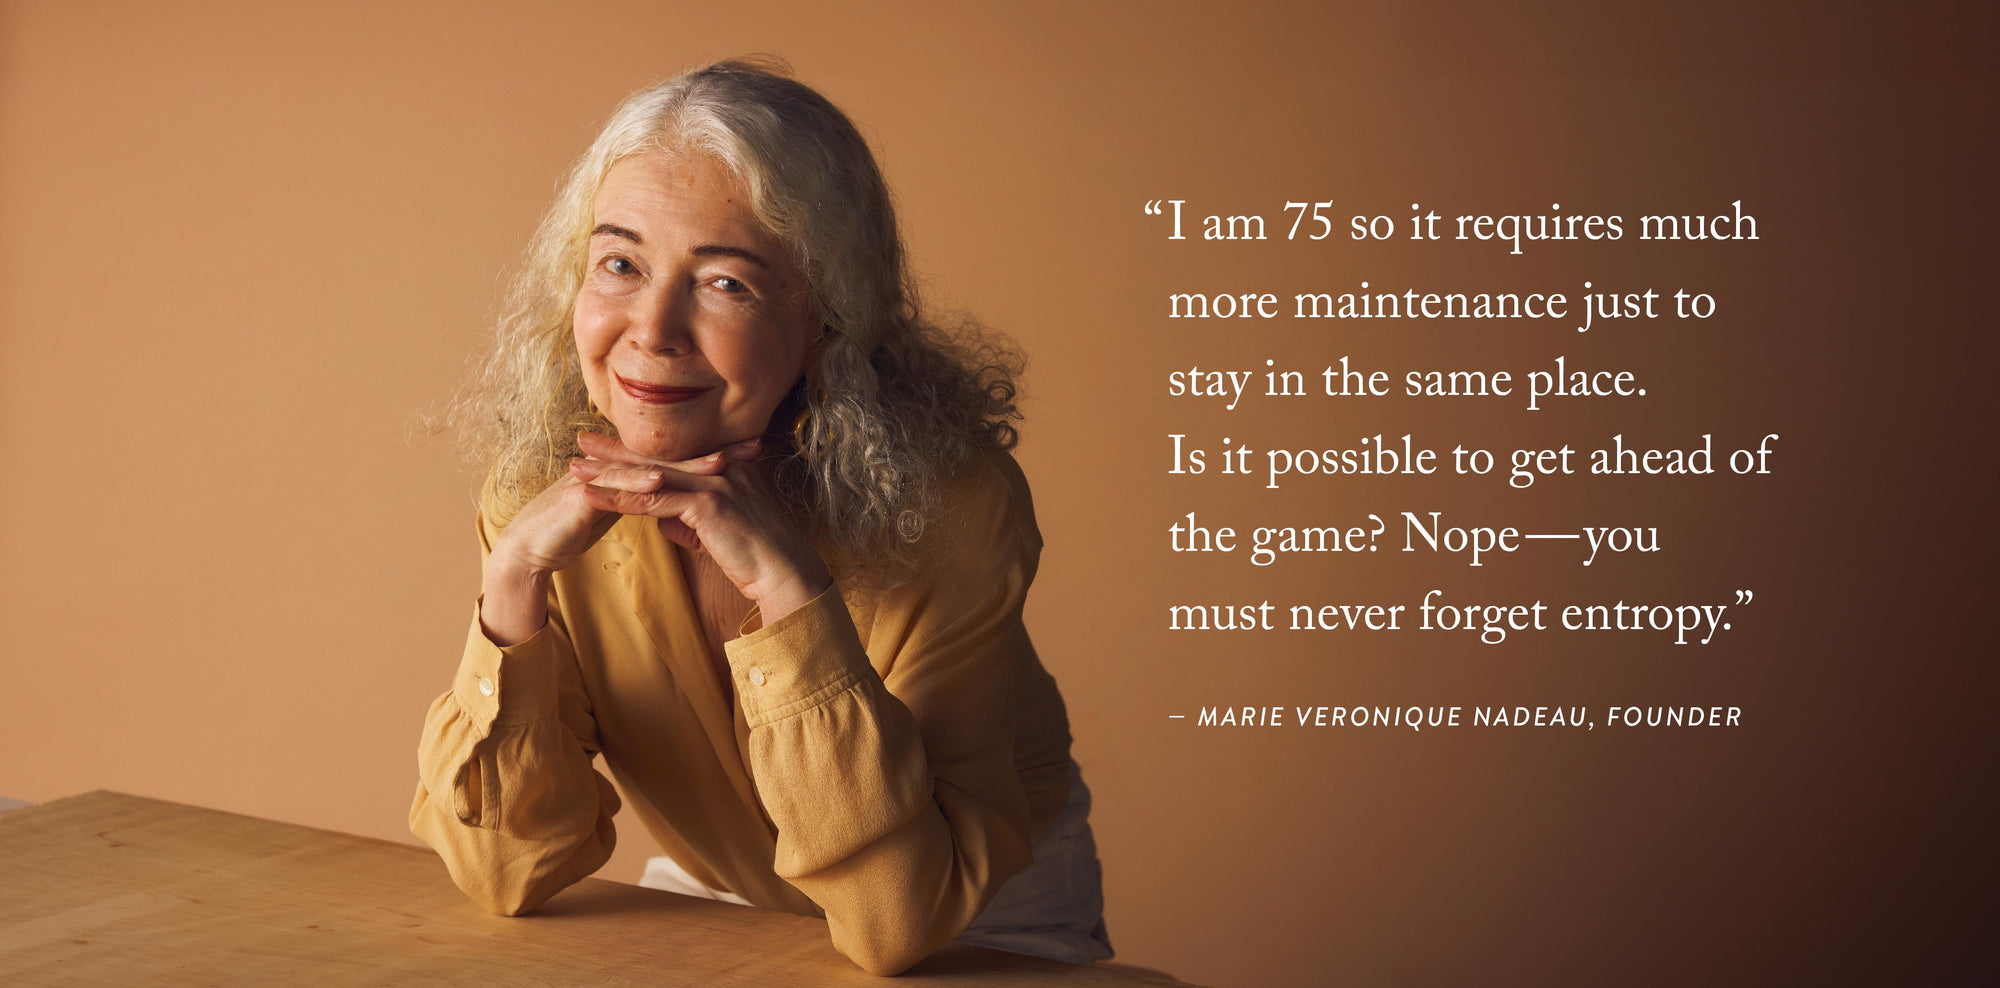 "I am 75 so it requires much more maintenance just to stay in the same pklace. Is it possible to get ahead of the game? Nope--you must never forget entropy." - Marie Veronique Nadeau, Founder